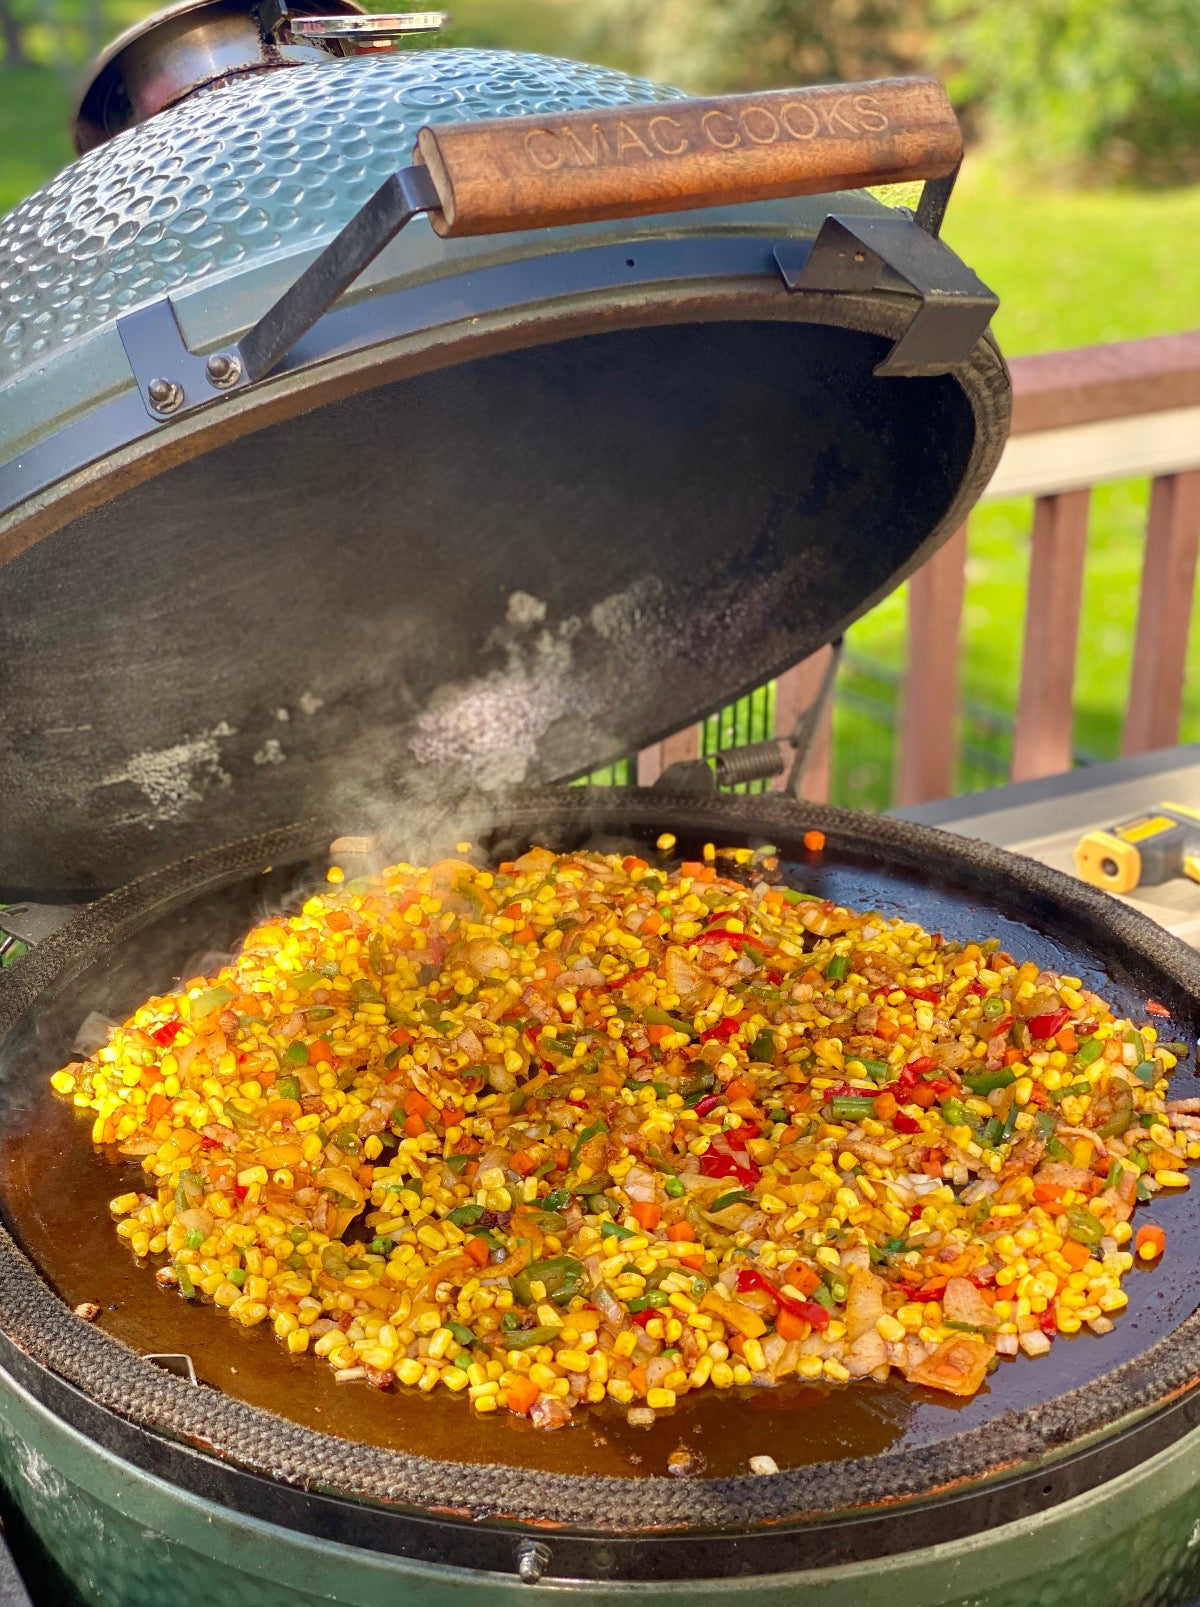 Flat Top Griddle Grill In Green Egg Full of Corn